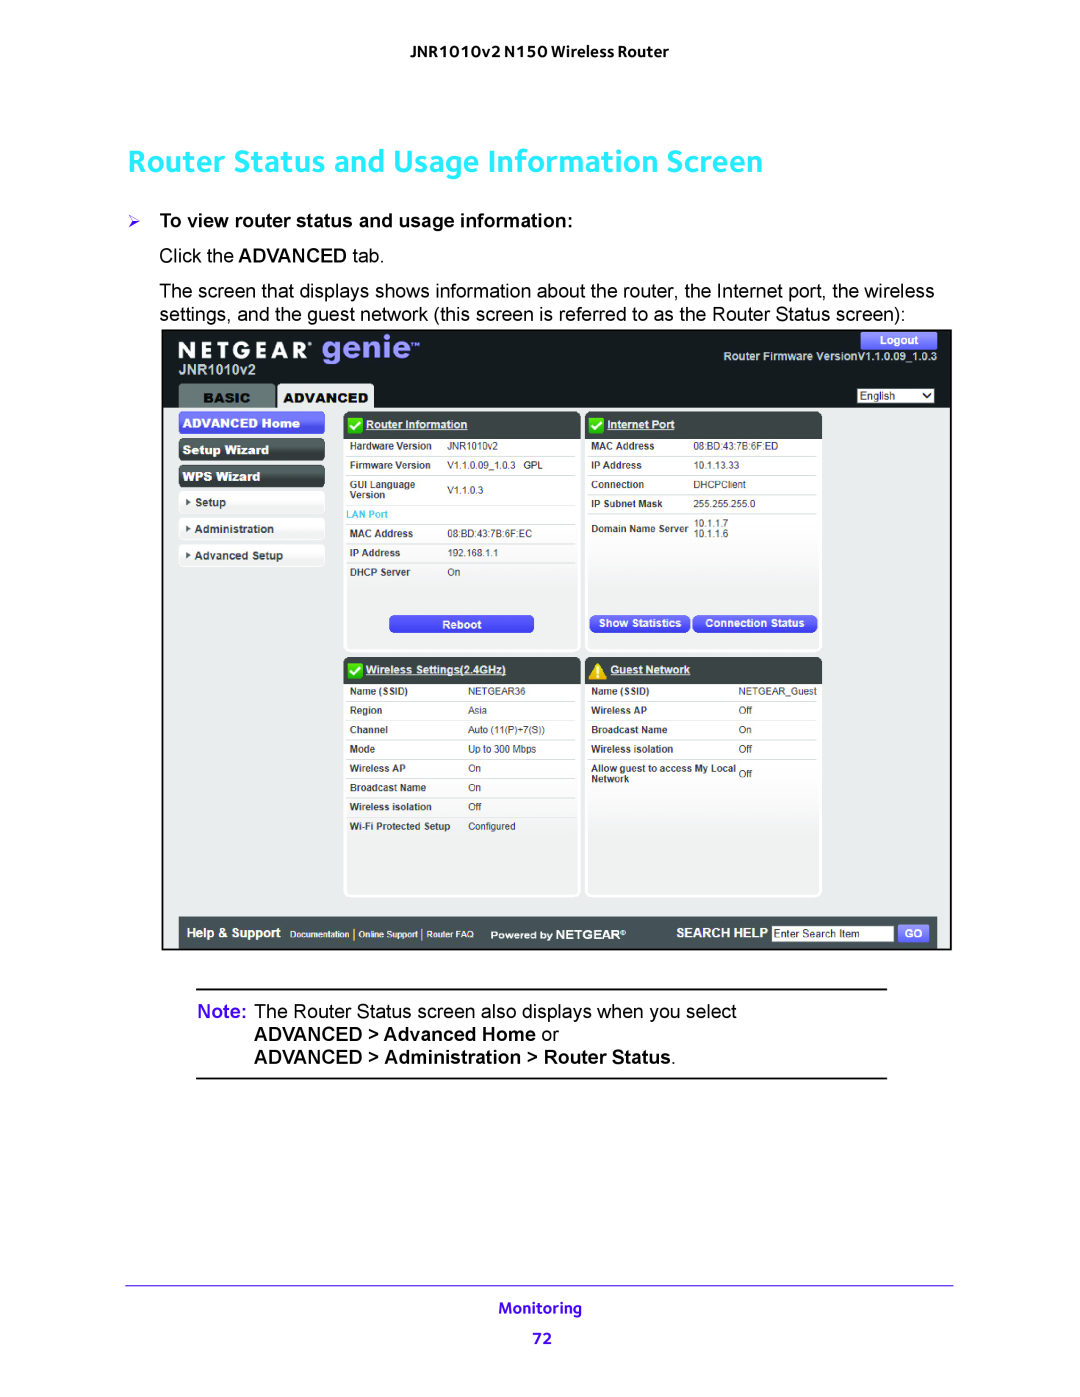 NETGEAR JNR1010V2 user manual Router Status and Usage Information Screen 